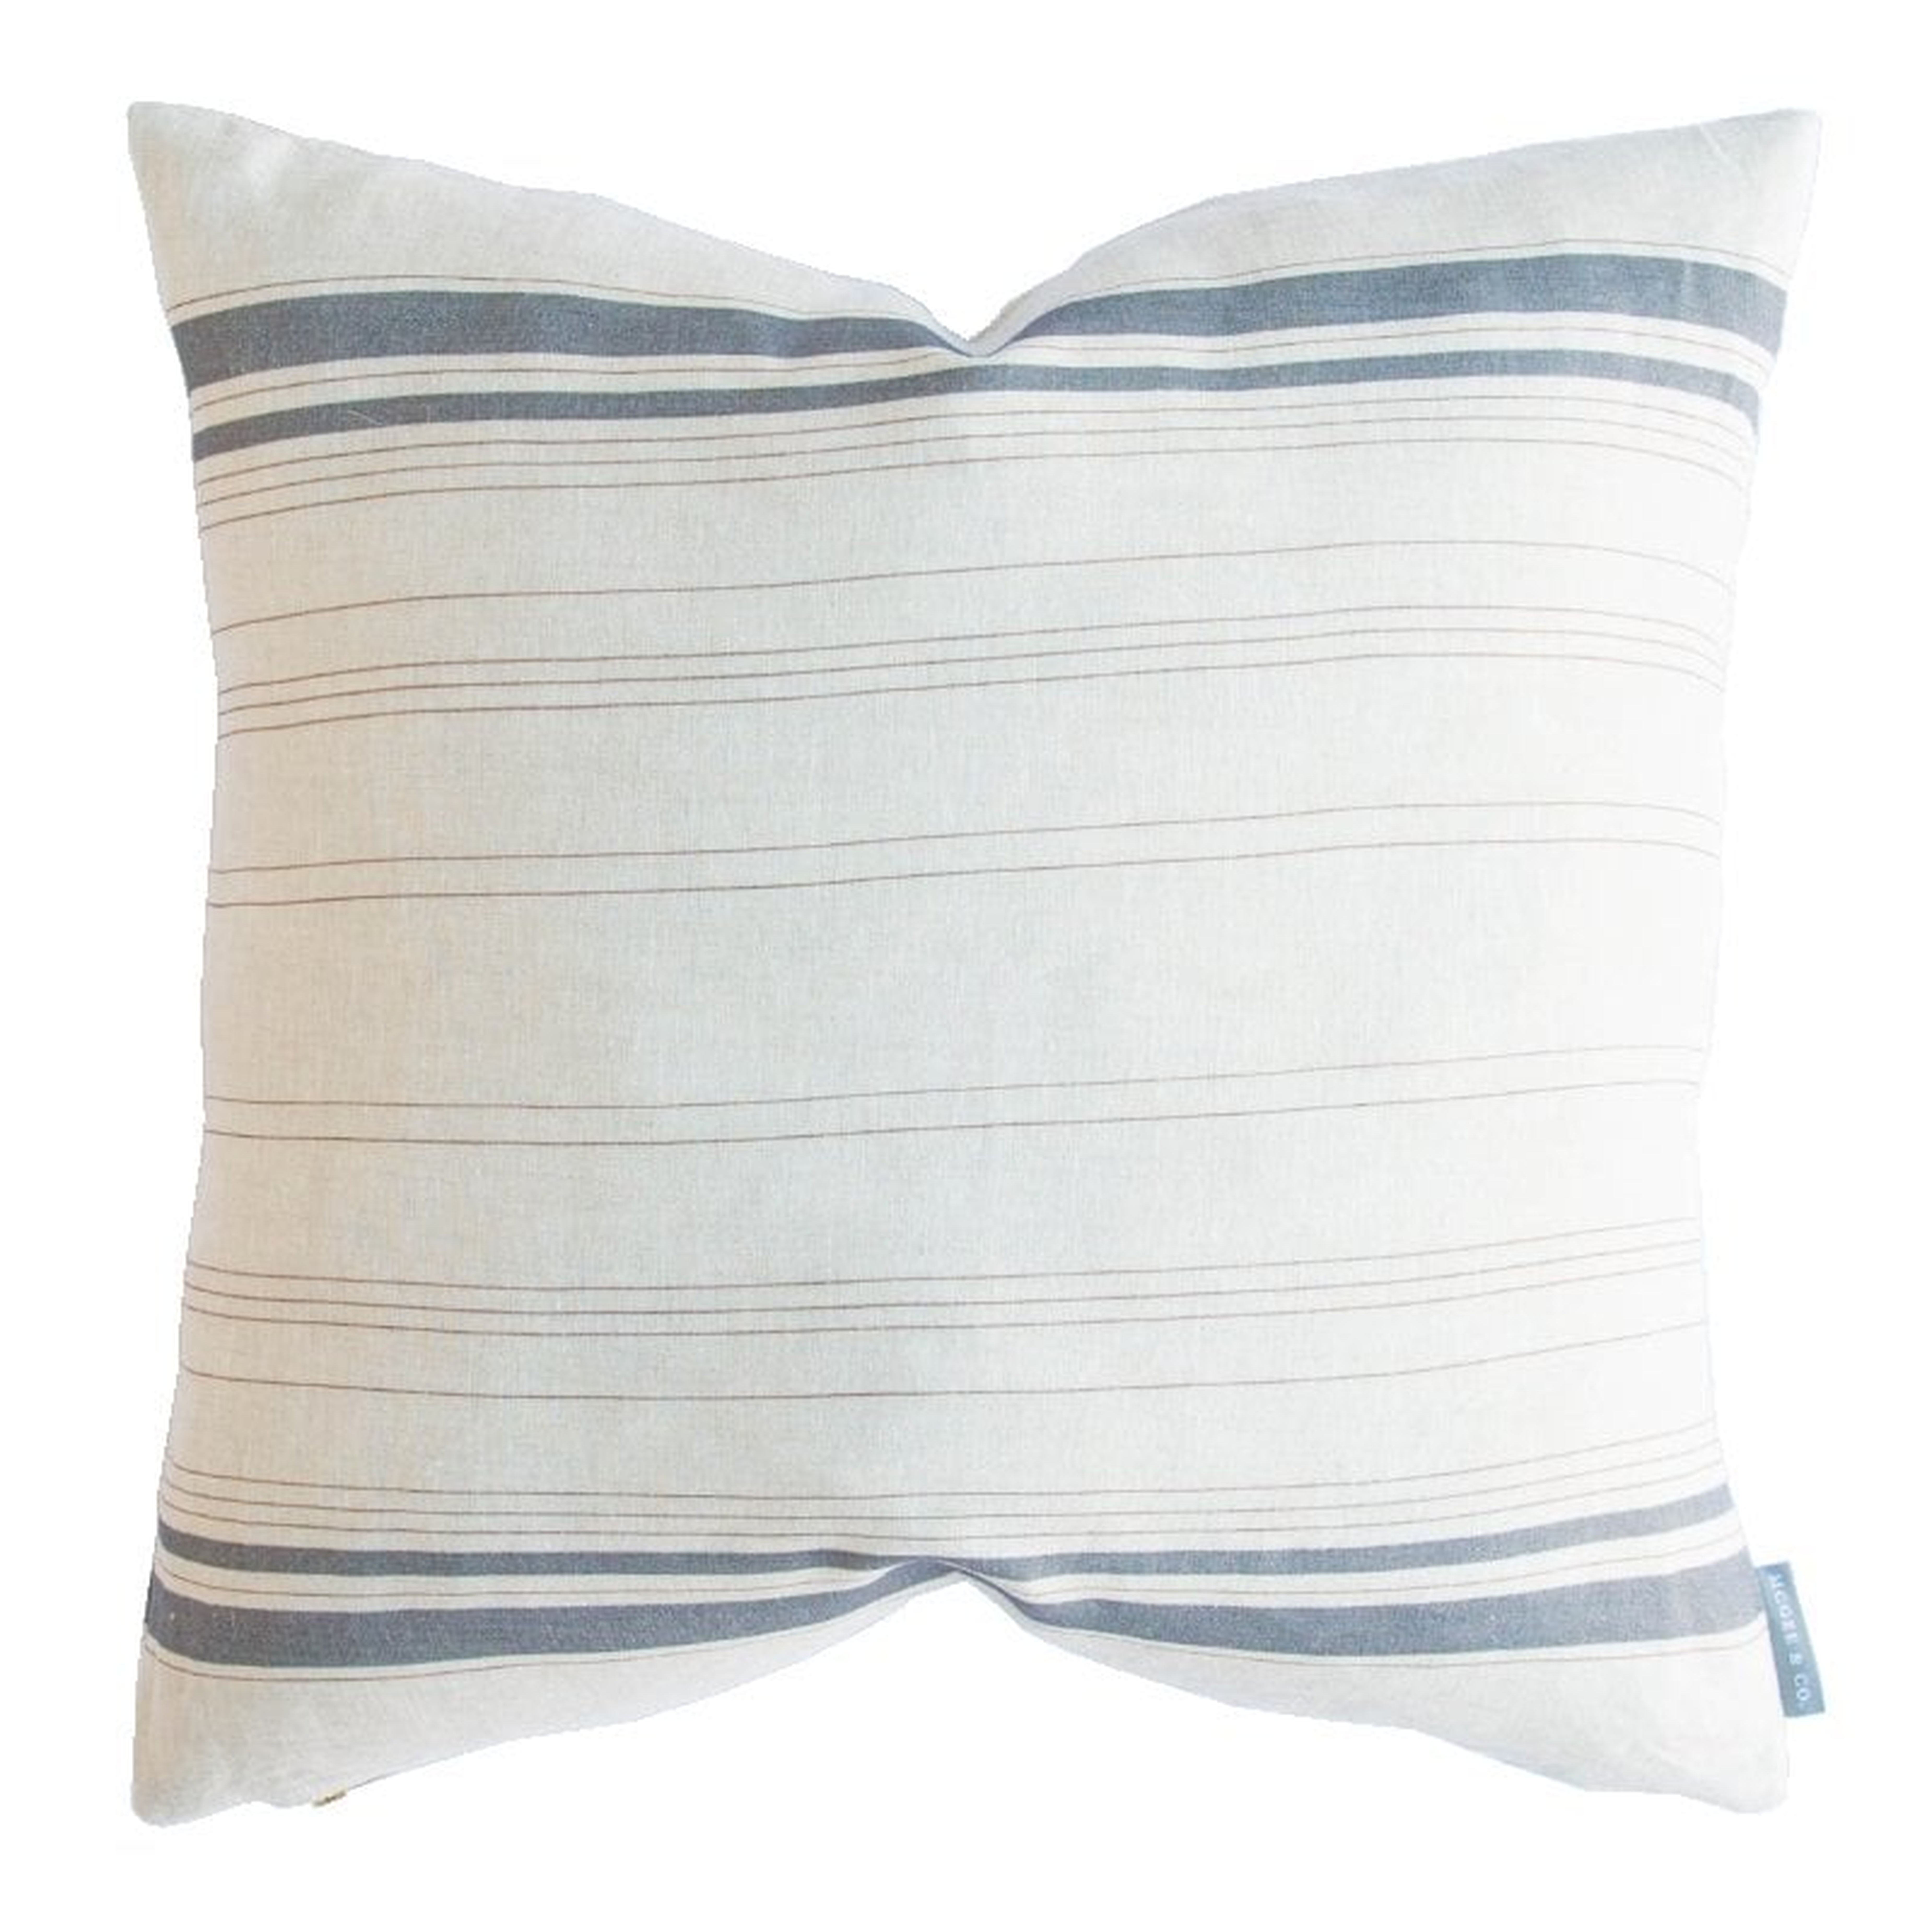 FRENCH STRIPE PILLOW WITHOUT INSERT, 20" x 20" - McGee & Co.